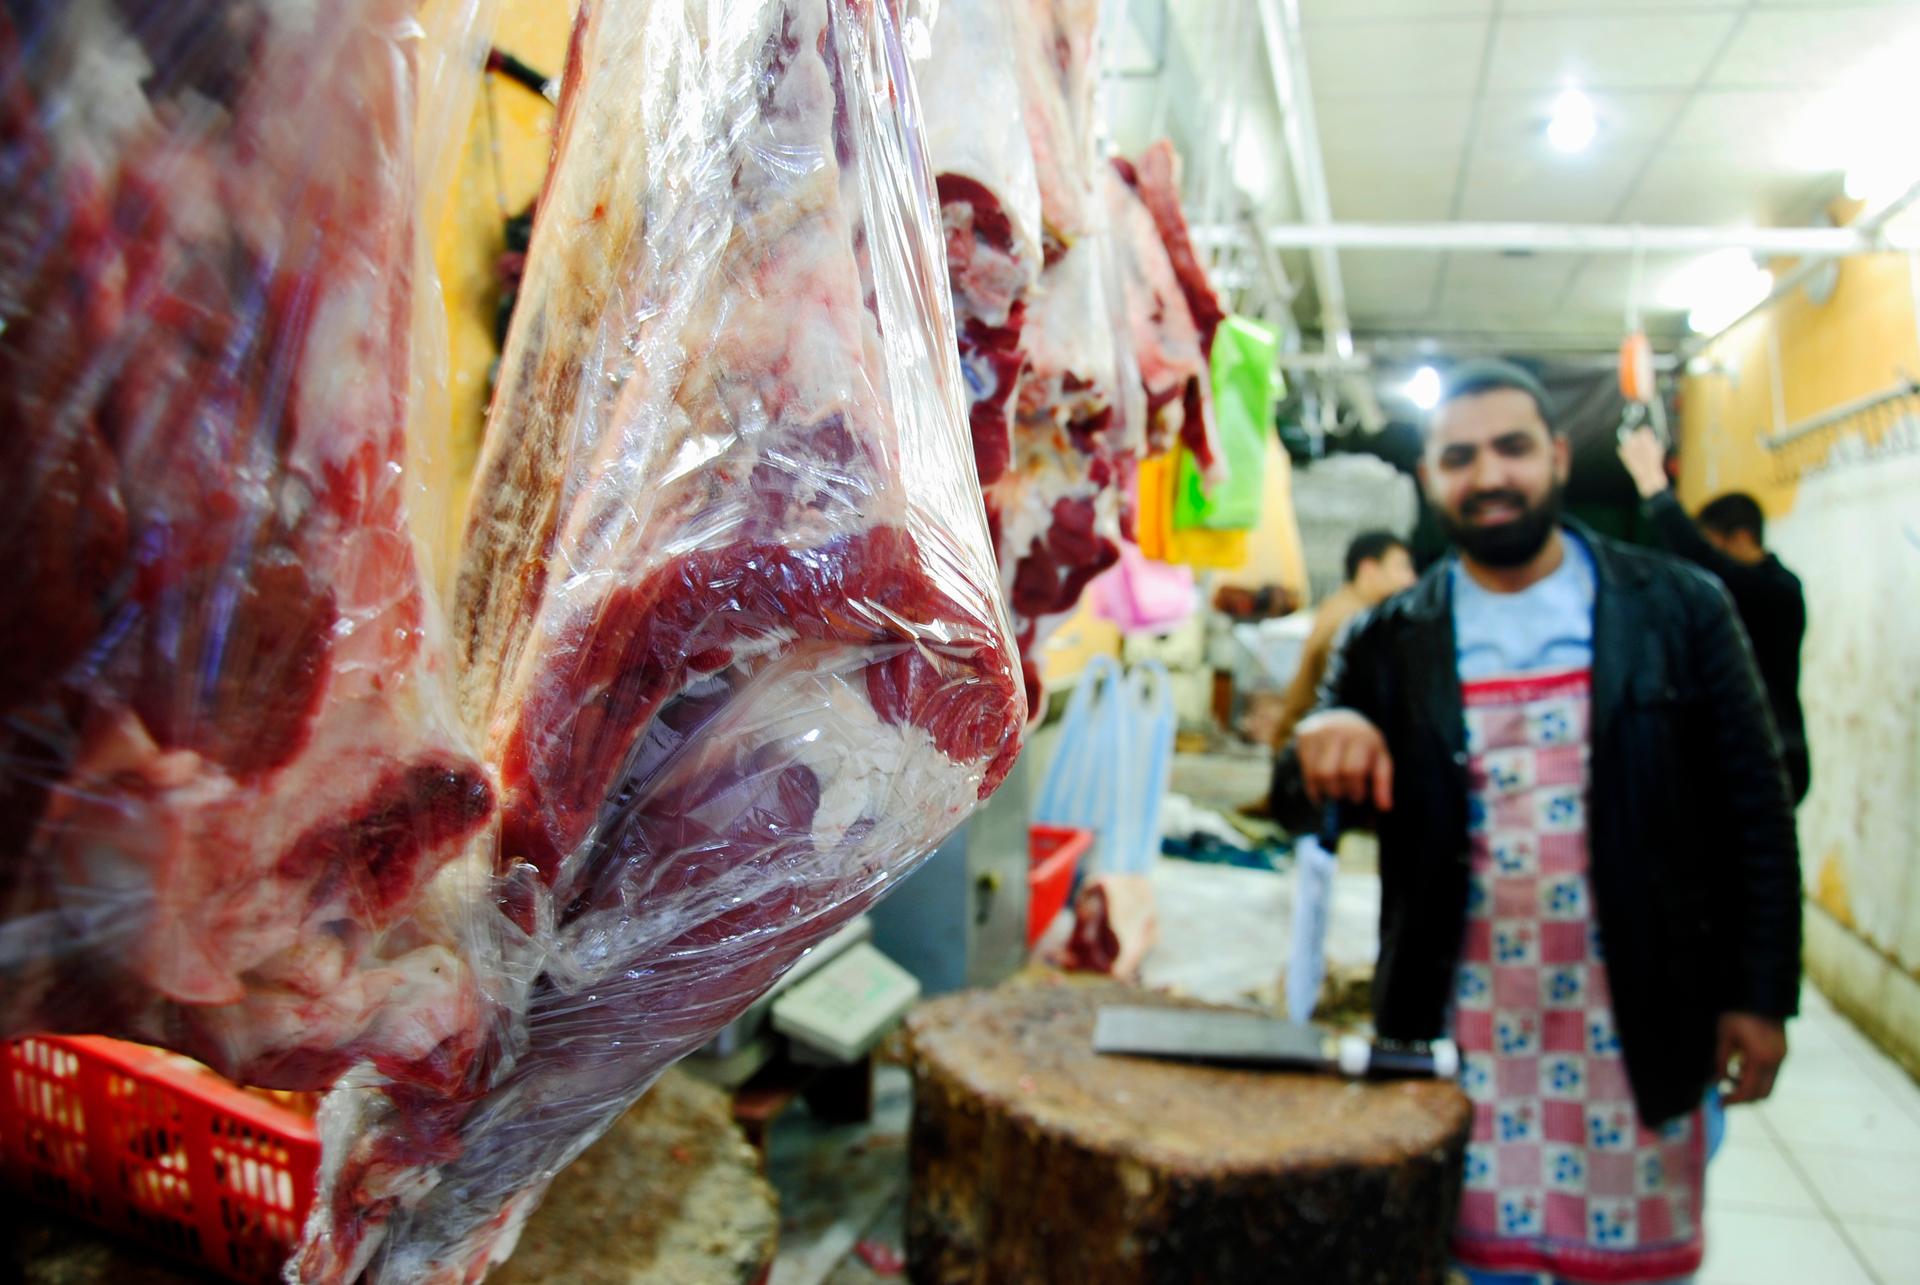 Afghanistan has witnessed a boom in meat production in last decade. Many Afghans depend on meat-producing businesses to earn a living.